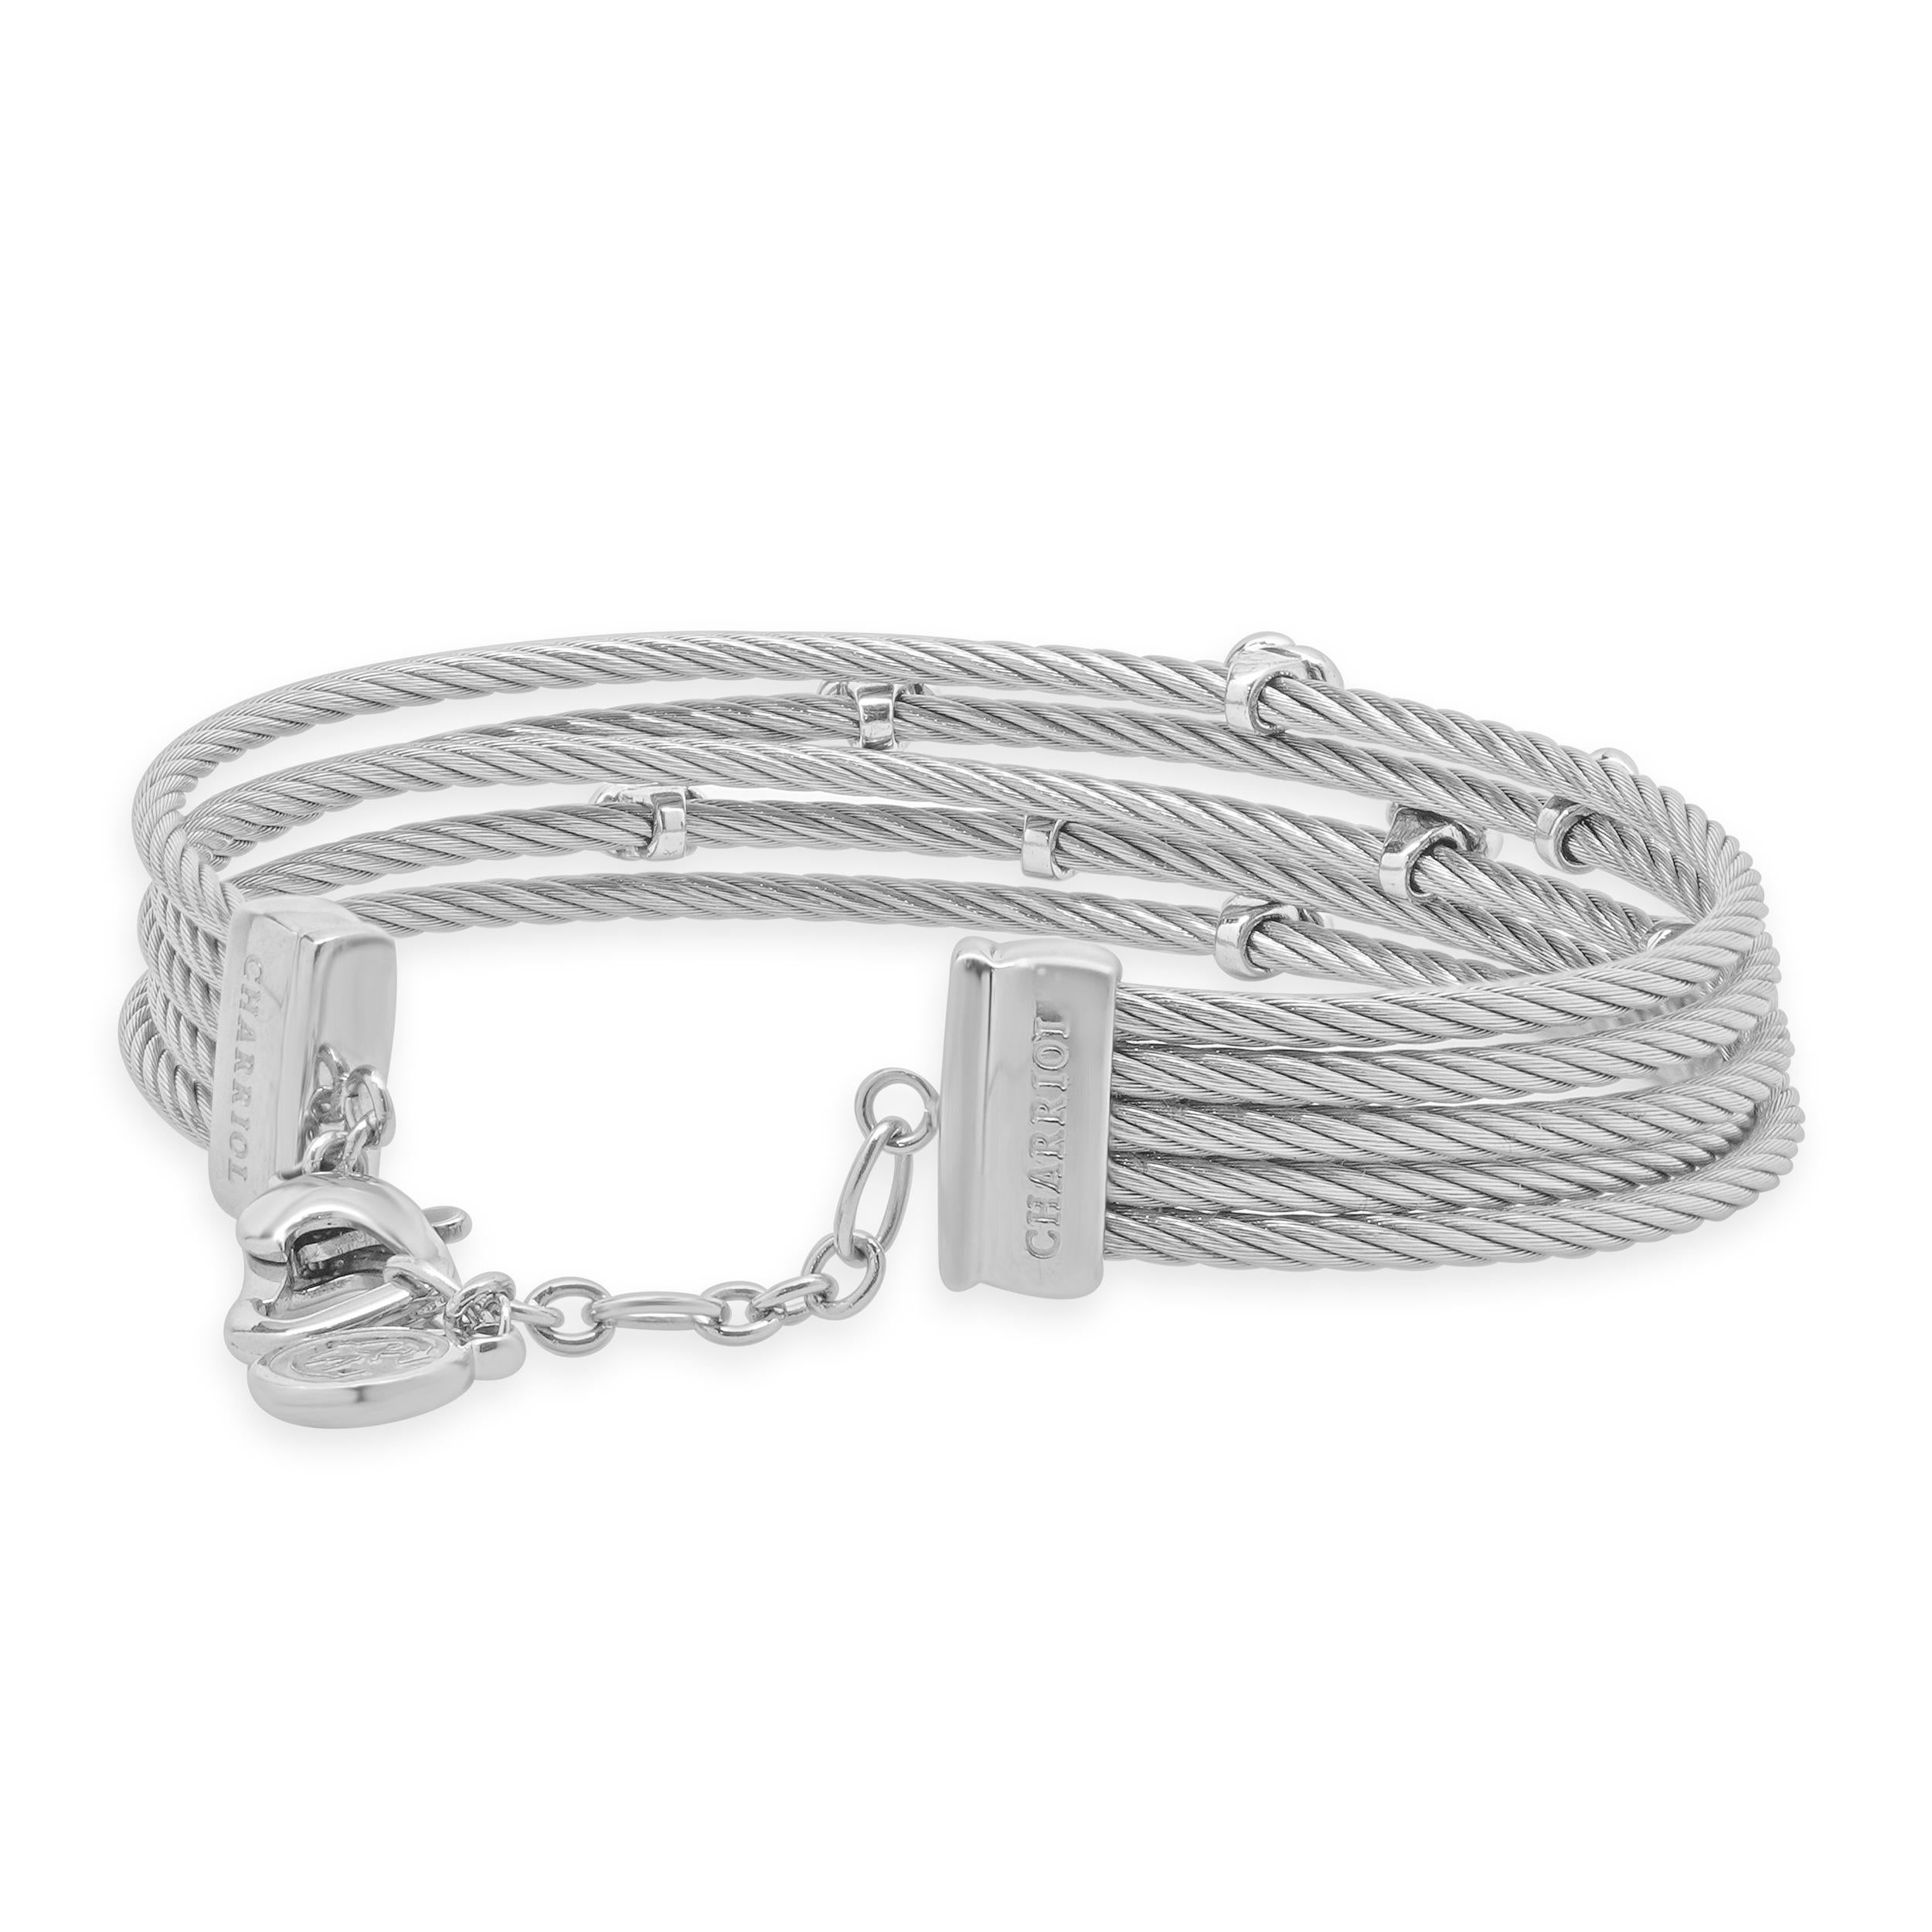 Charriol Stainless Steel Malia Knot Five Row Bracelet In Excellent Condition For Sale In Scottsdale, AZ